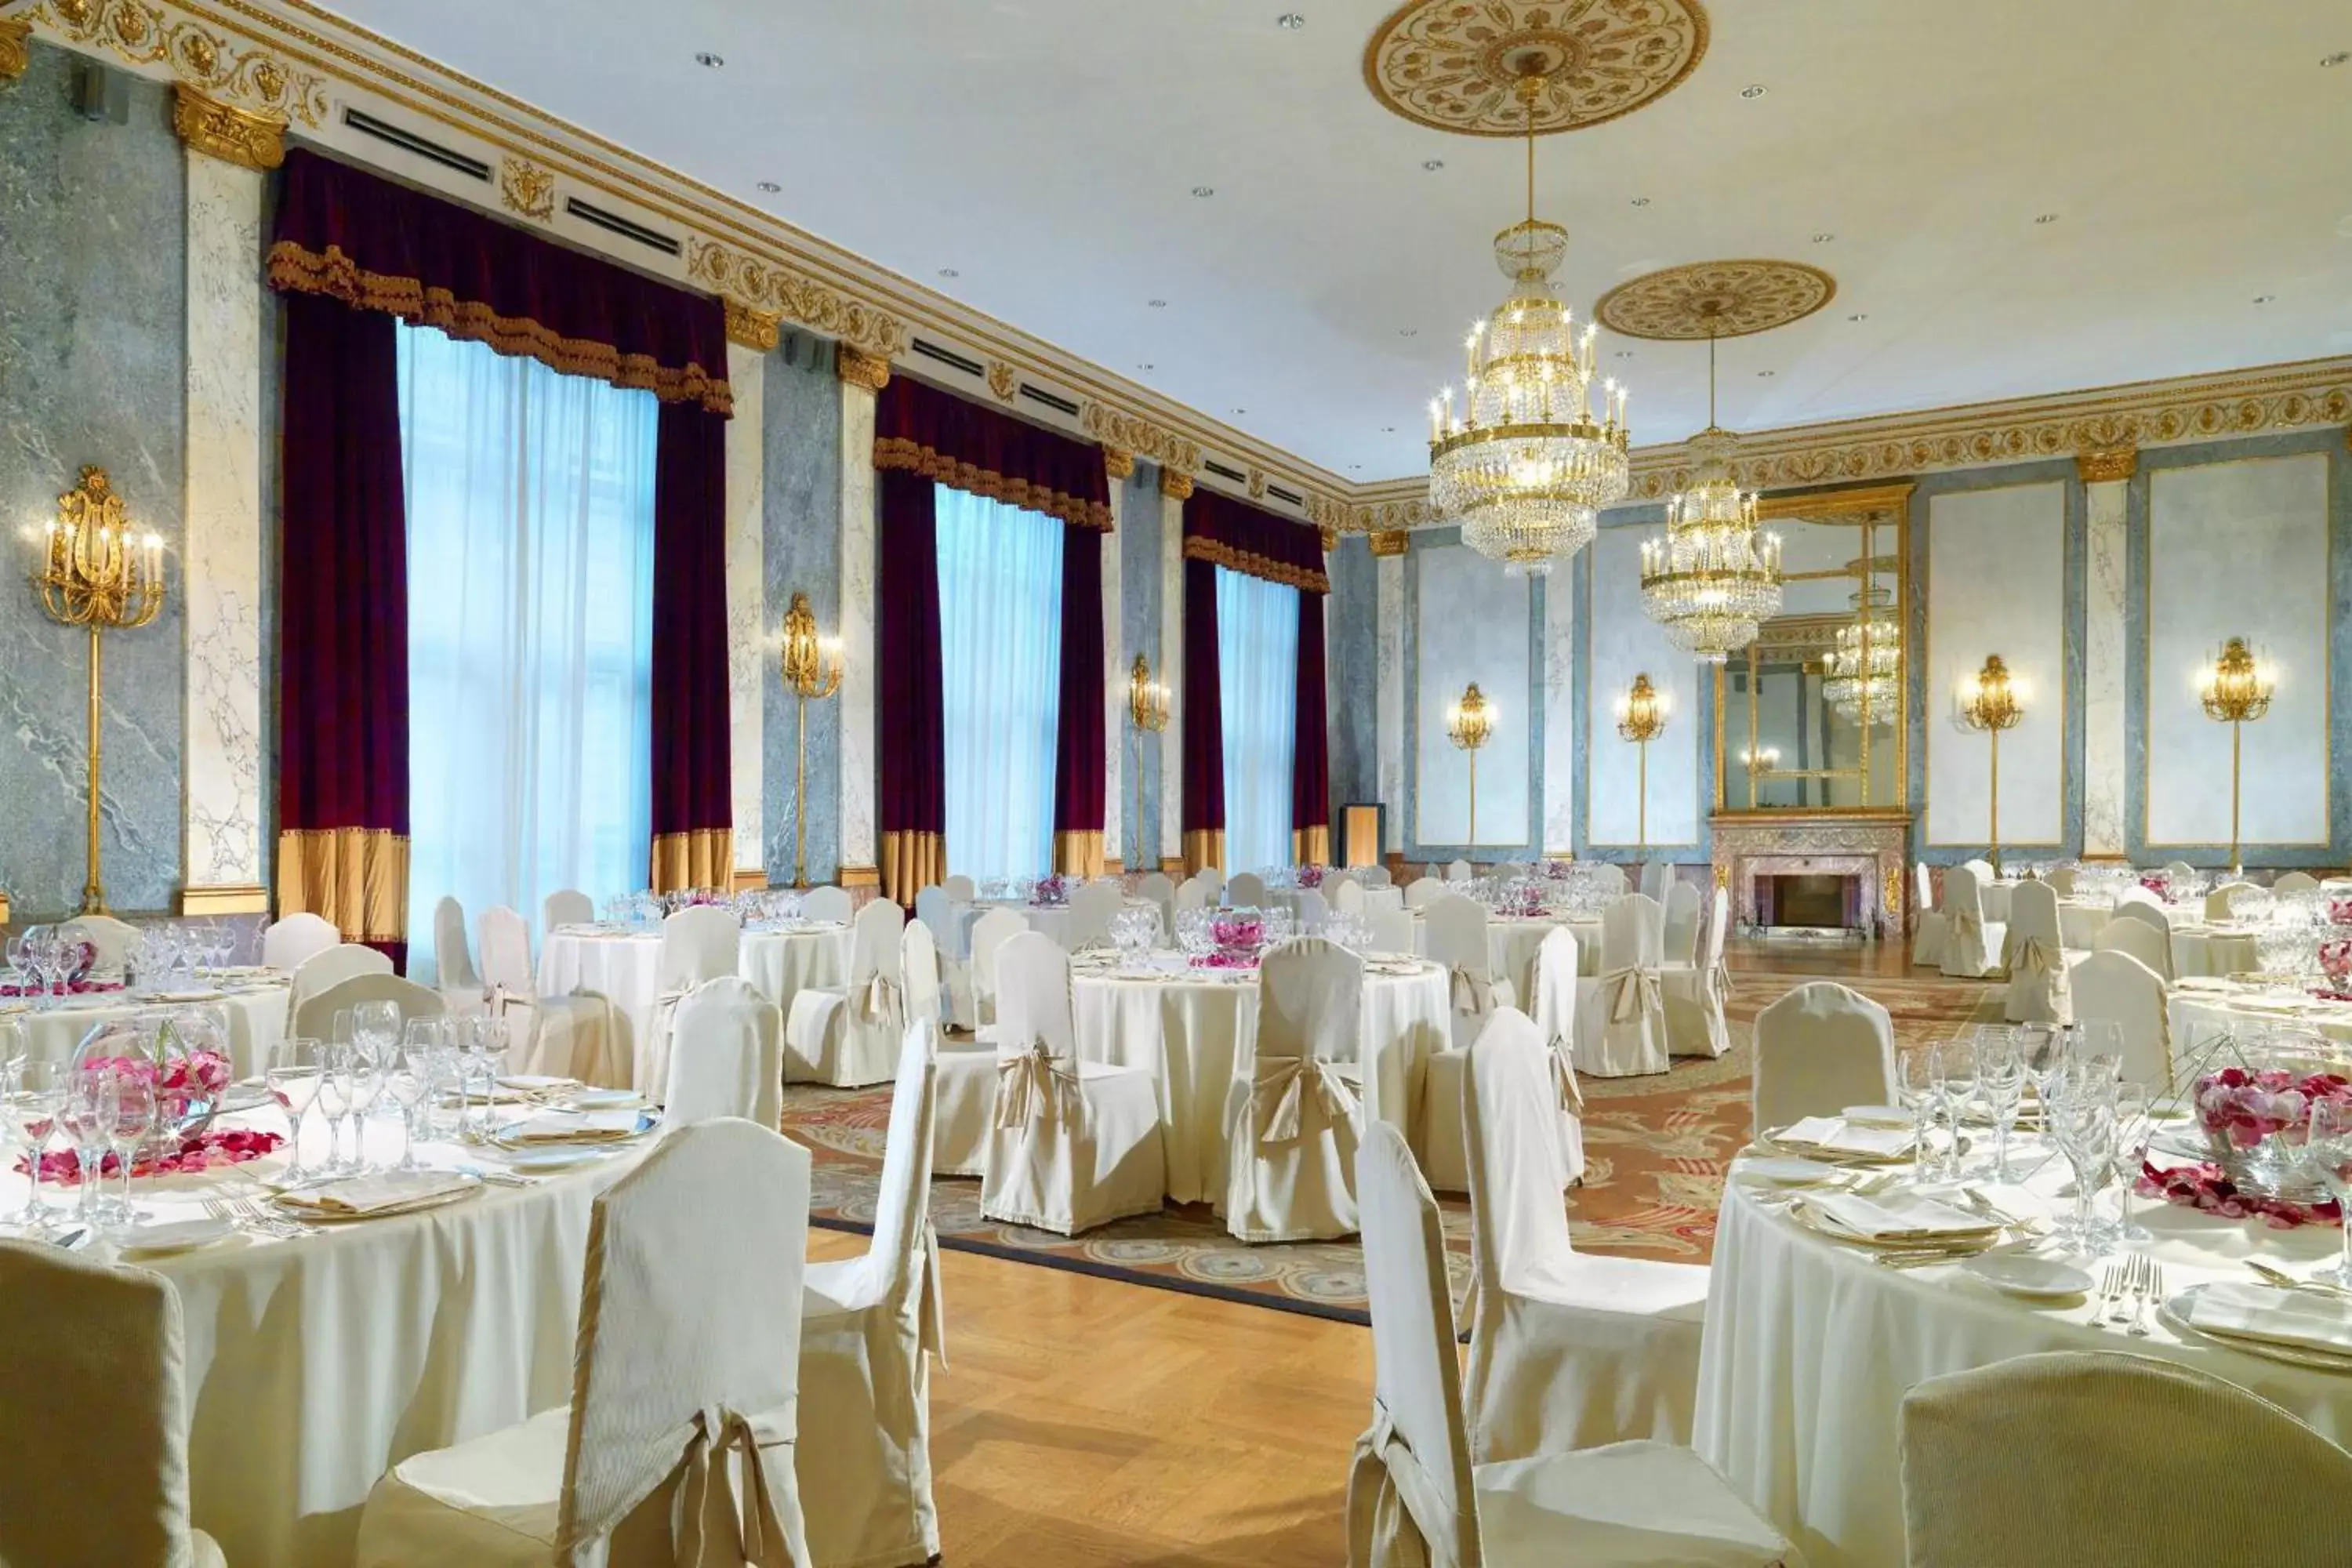 Meeting/conference room, Banquet Facilities in The Westin Excelsior, Rome